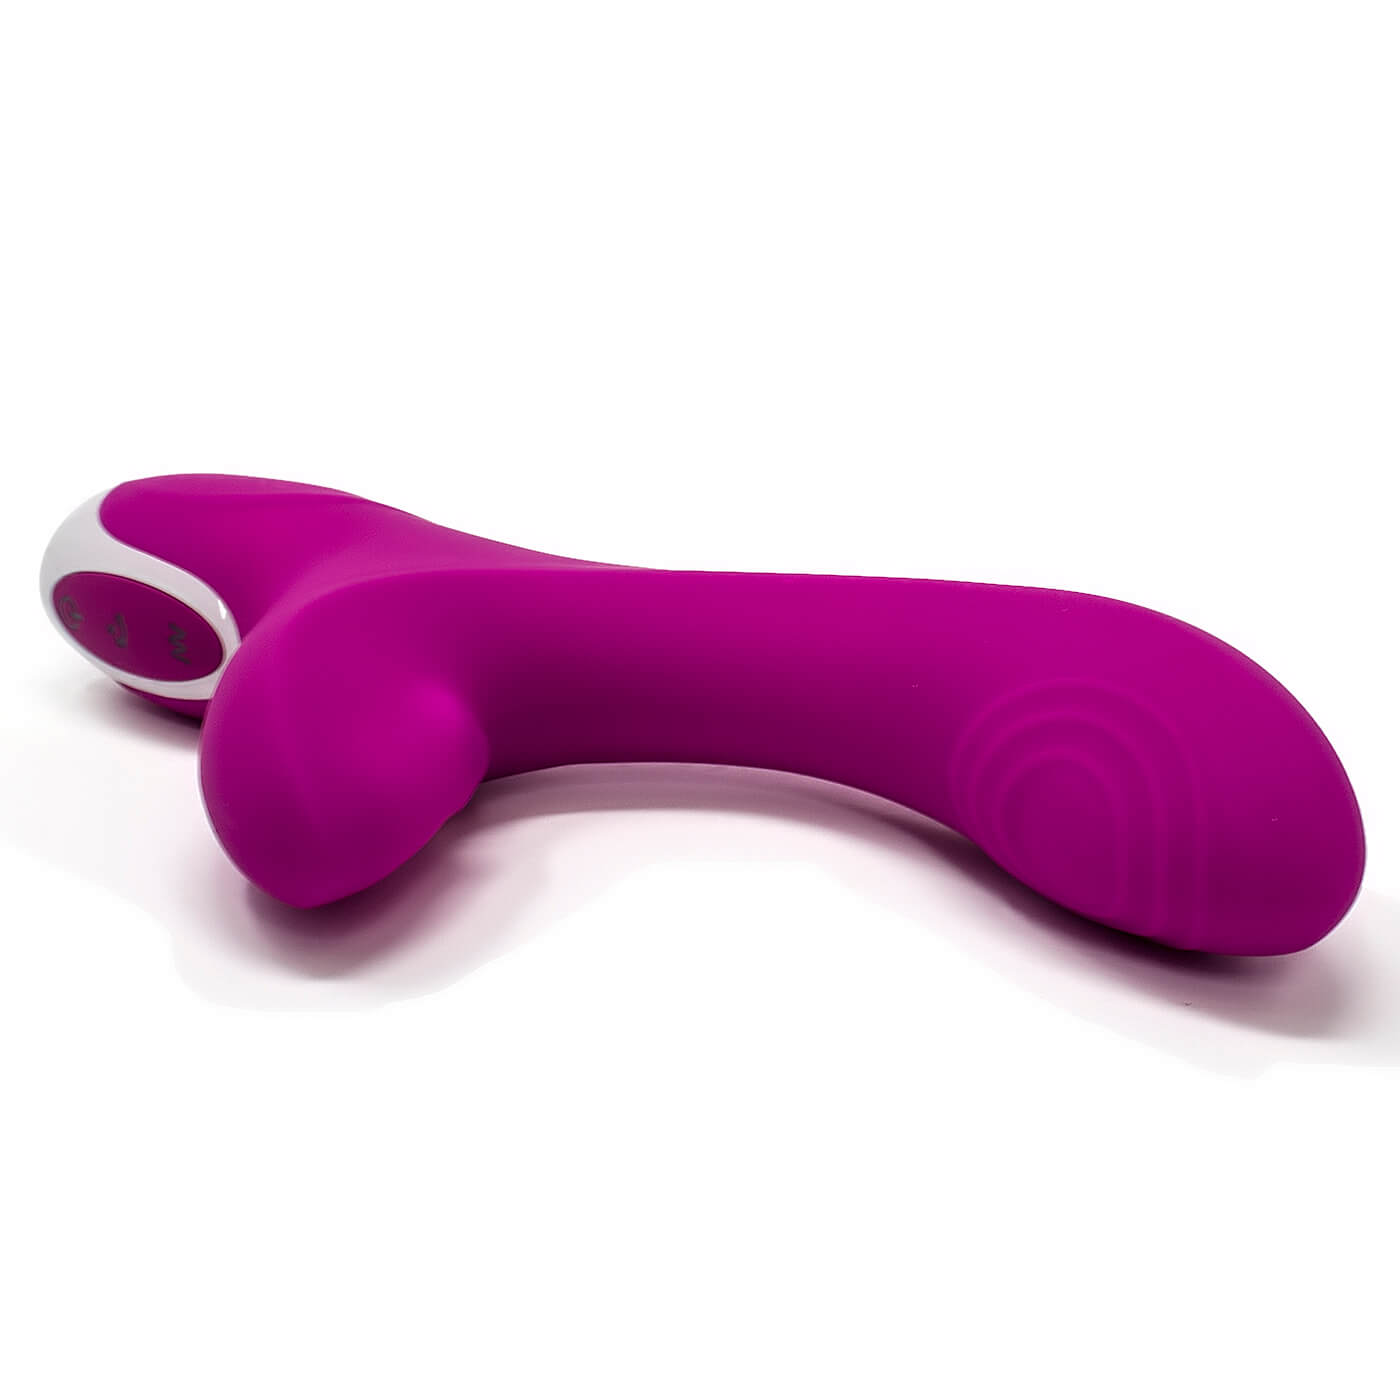 Evolved Novelties Love Button 10 Function USB Rechargeable Clitoral & G-Spot Vibrator